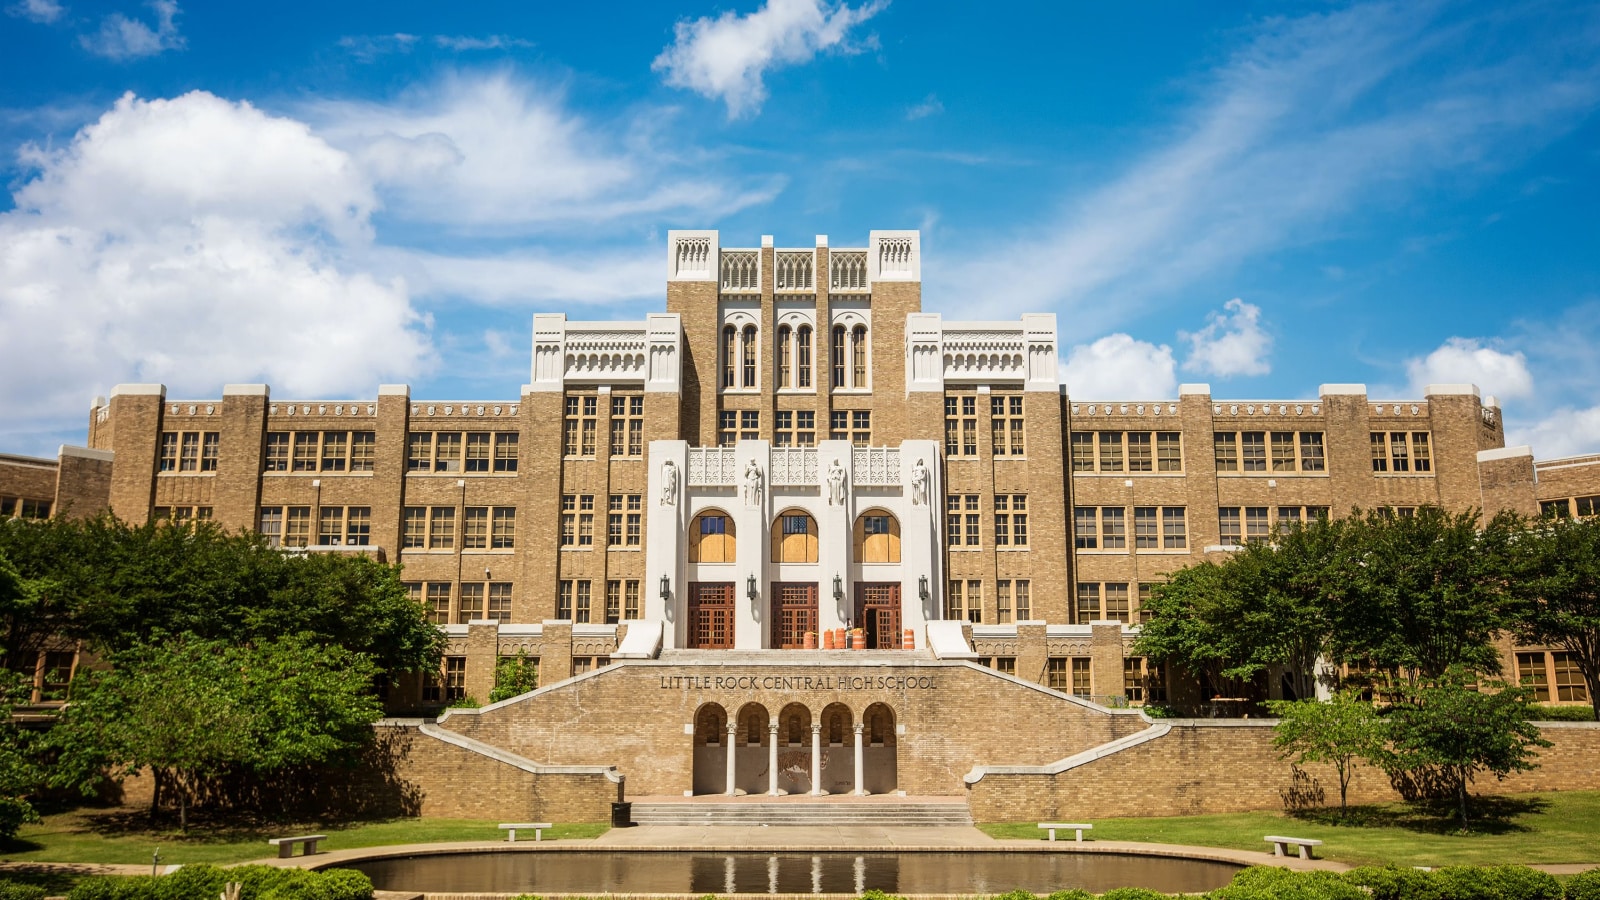 Little Rock, Arkansas: 01-10-2020: Little Rock Central High School, which is a National Historic Site.